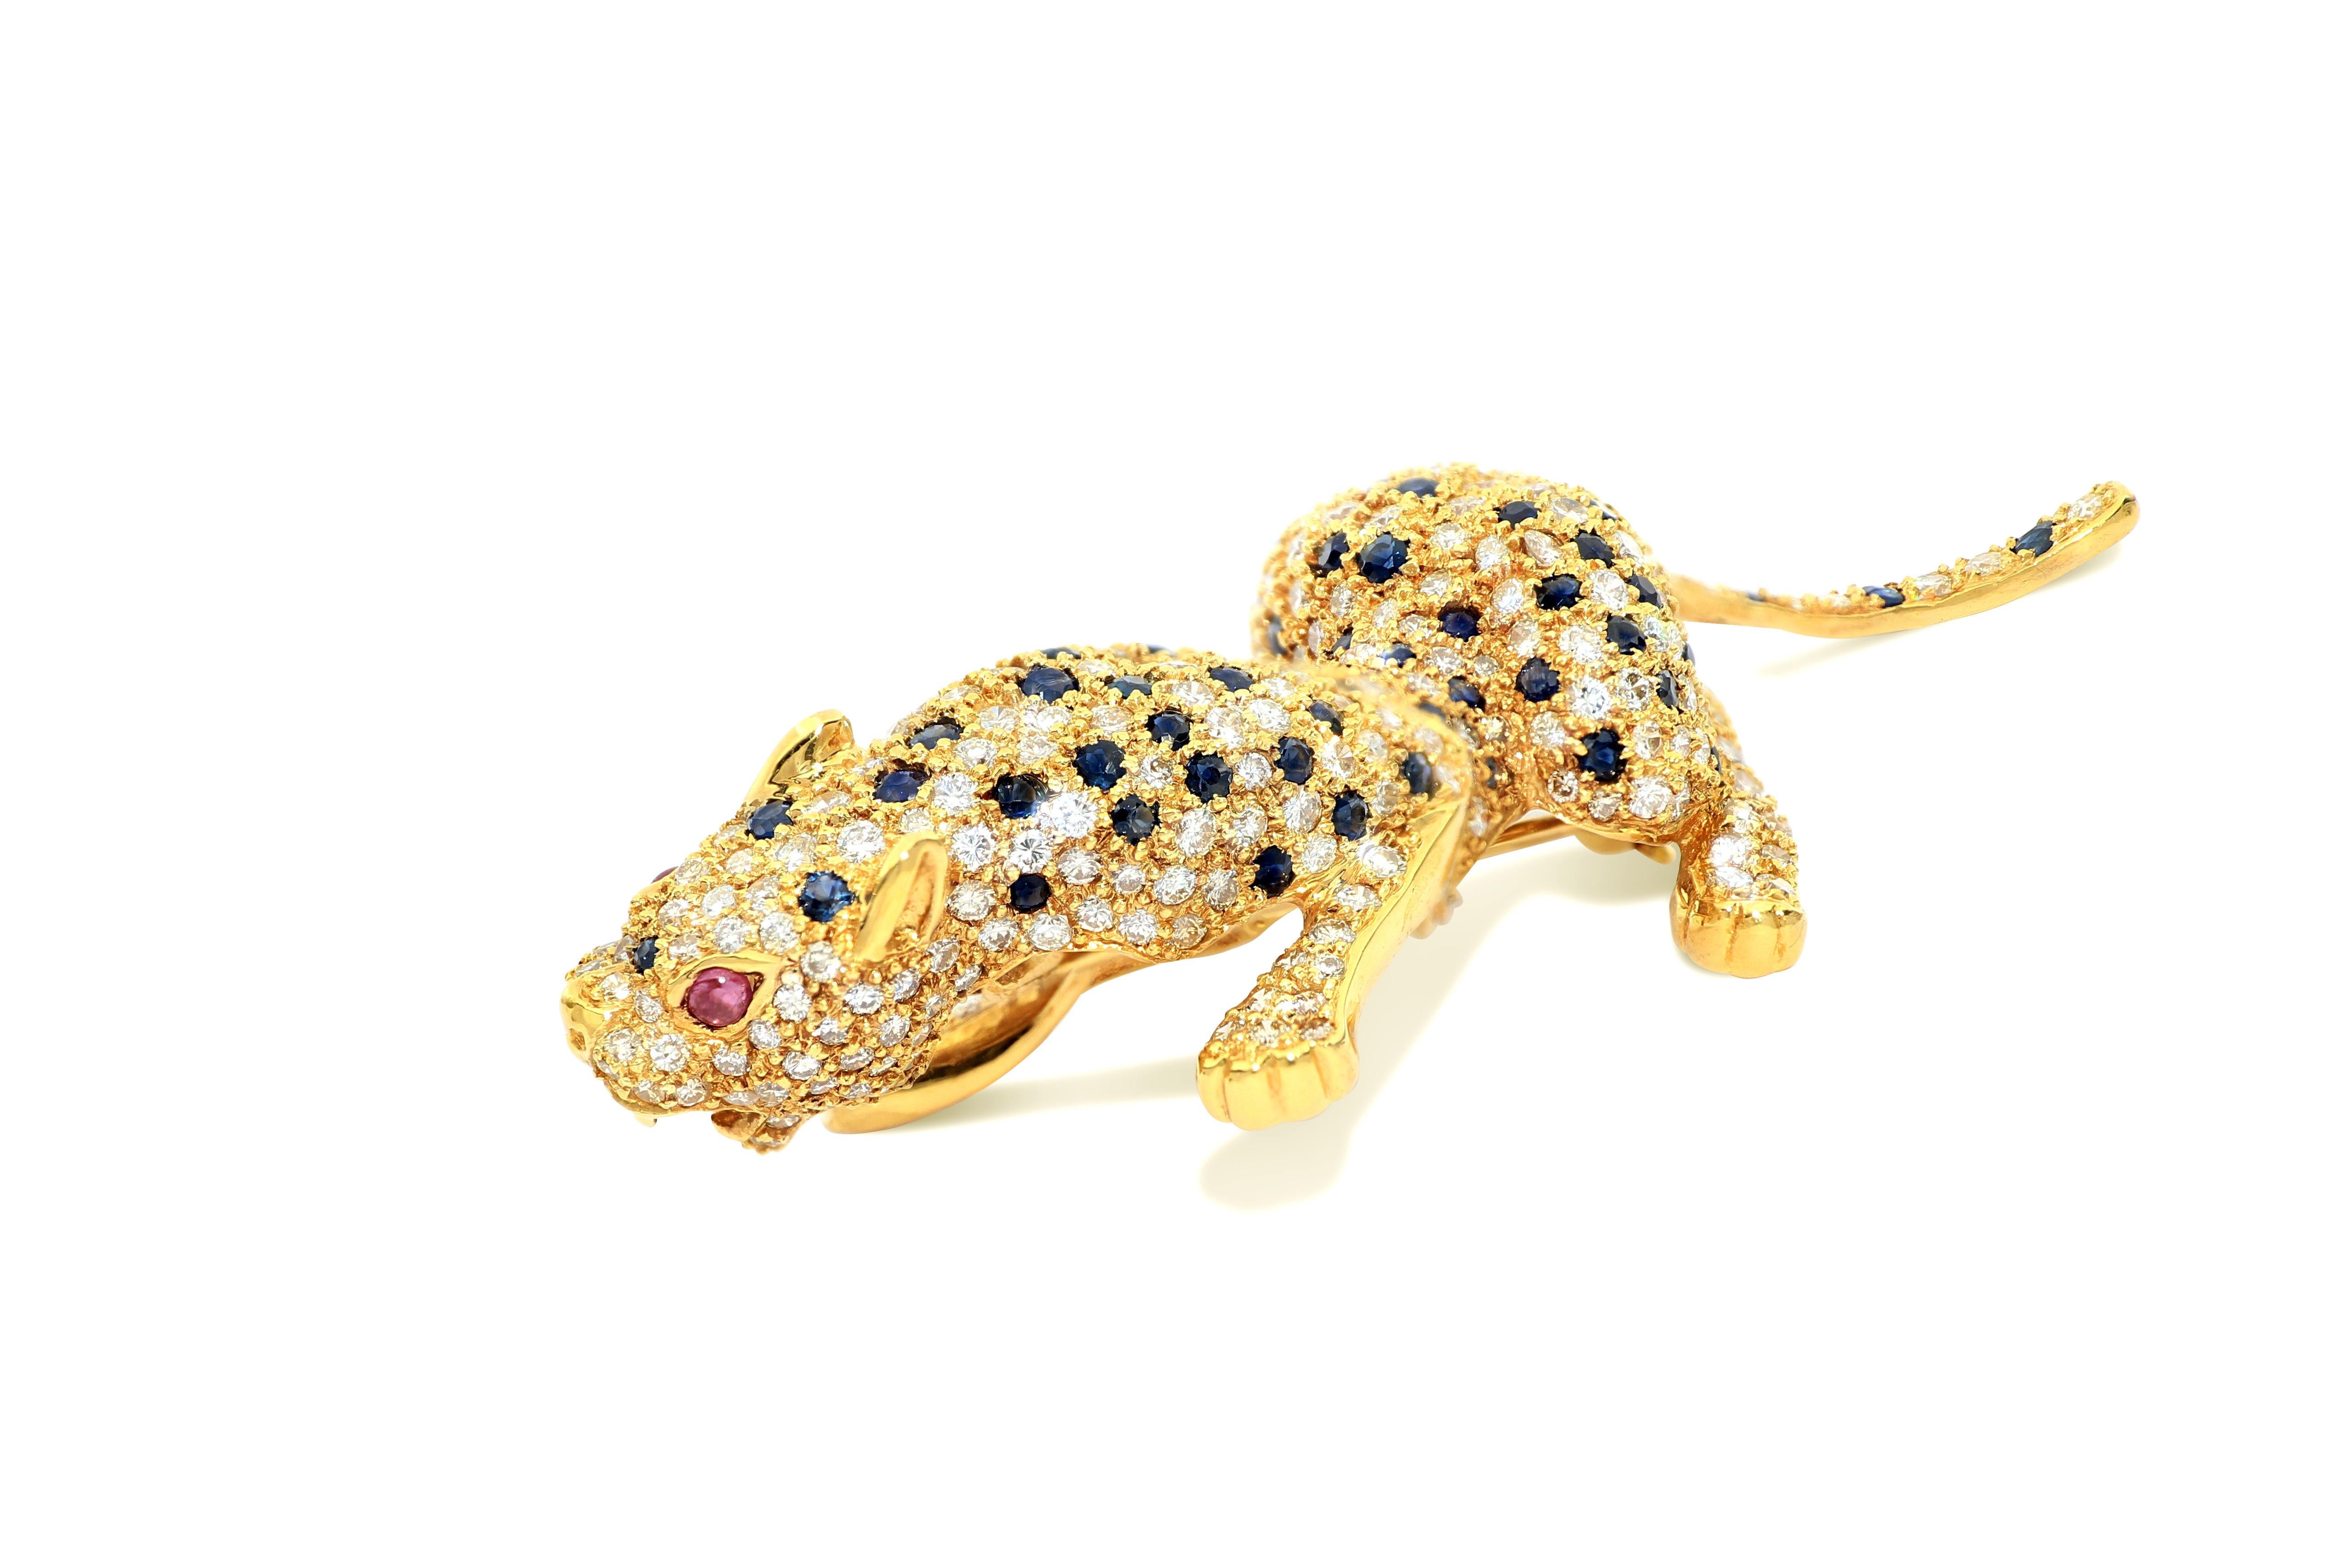 
This is a magnificant panther diamond brooch in 18K yellow gold, set with 354 pieces of white diamond totalling 6.97 carats in weight, 112 pieces of blue sapphire weighing 5.95 carats, and two eyes inlaid with two pieces of ruby. The Panther brooch